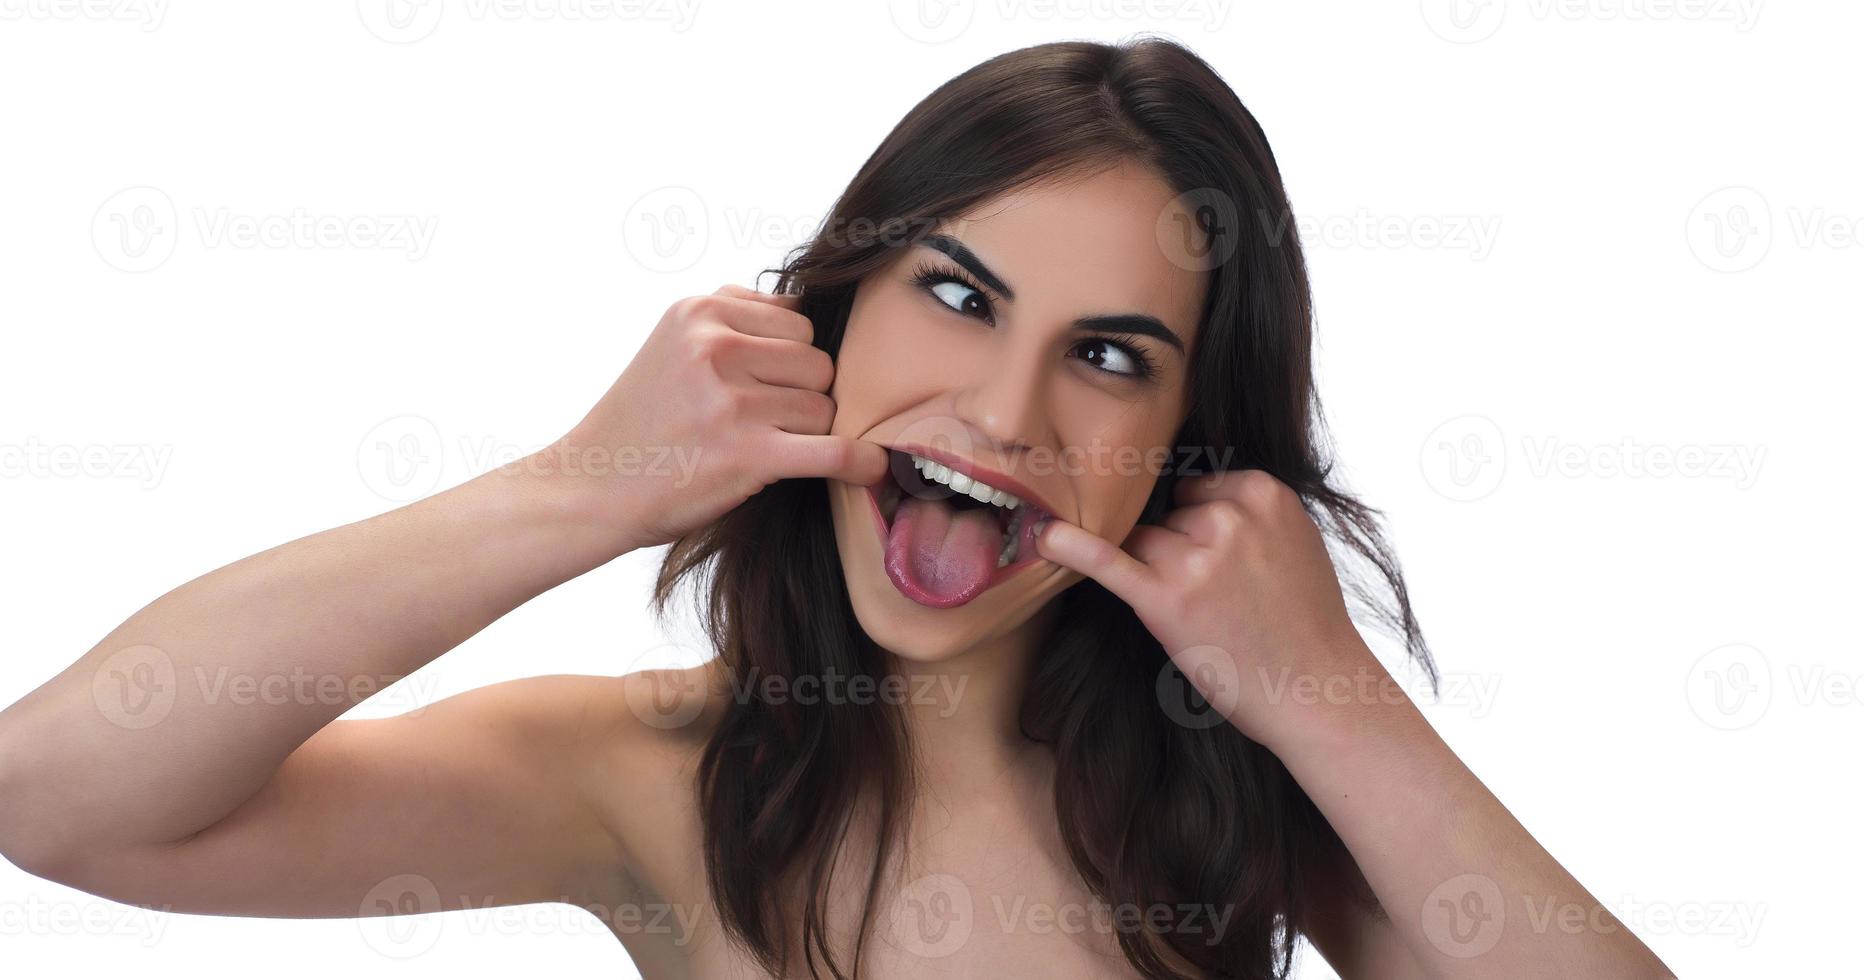 squint eyed woman with weird expression isolated on white photo